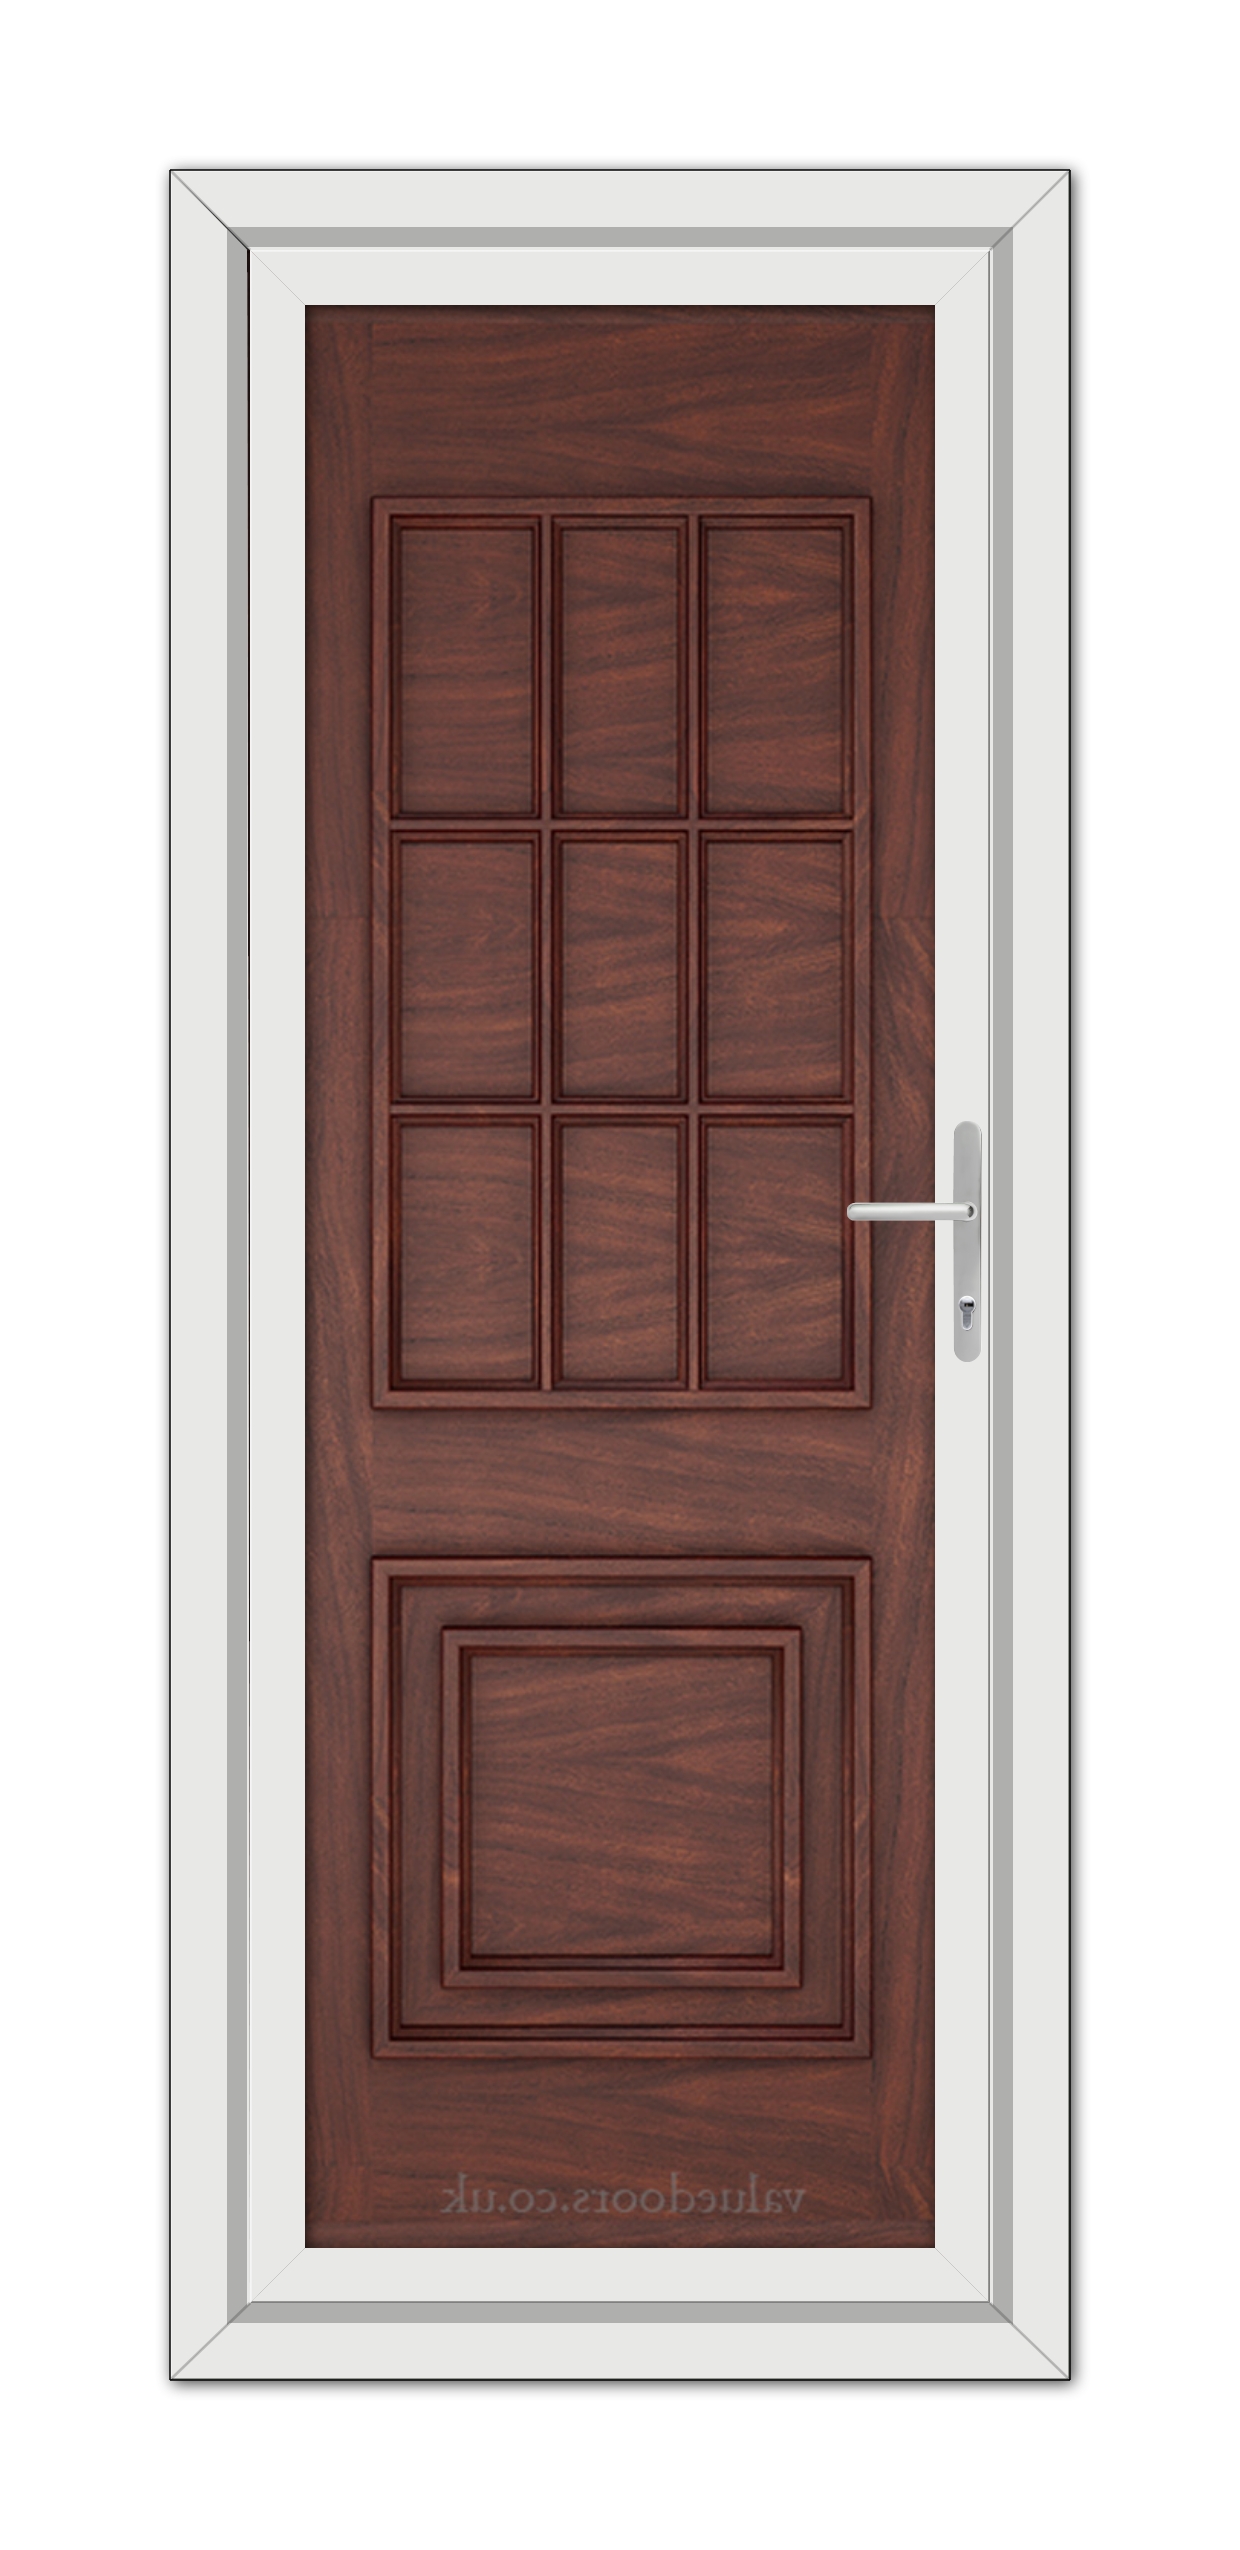 A close-up of a Rosewood Cambridge One Solid uPVC Door.